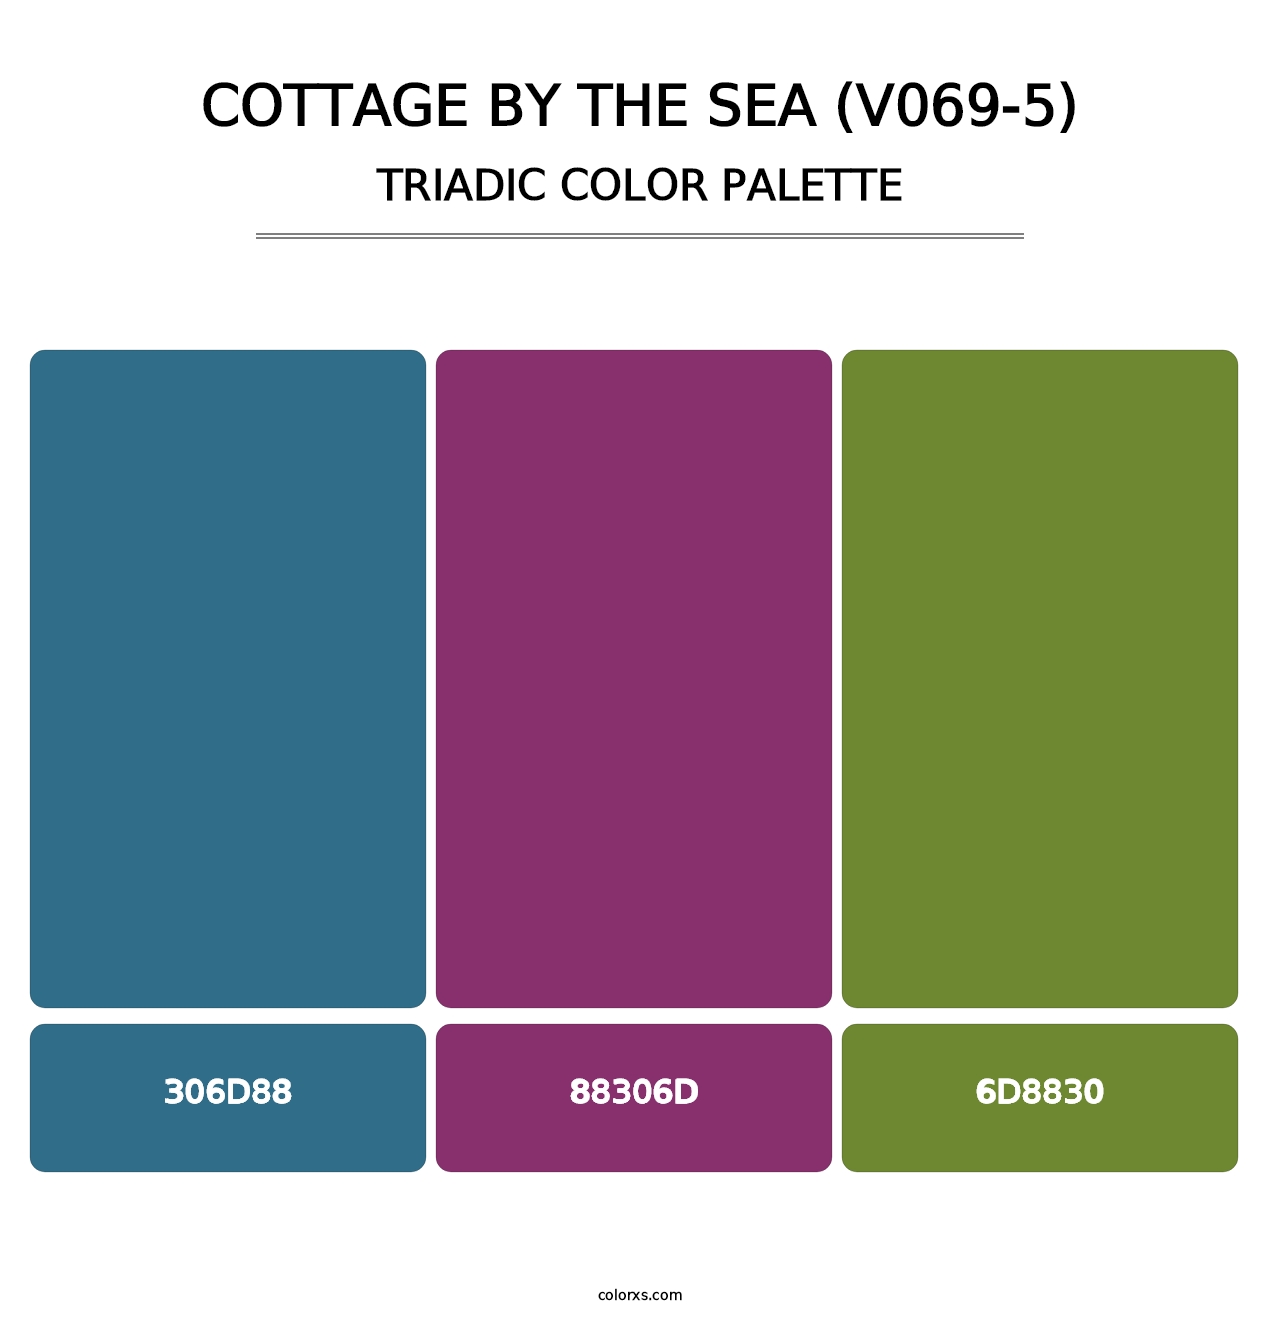 Cottage by the Sea (V069-5) - Triadic Color Palette